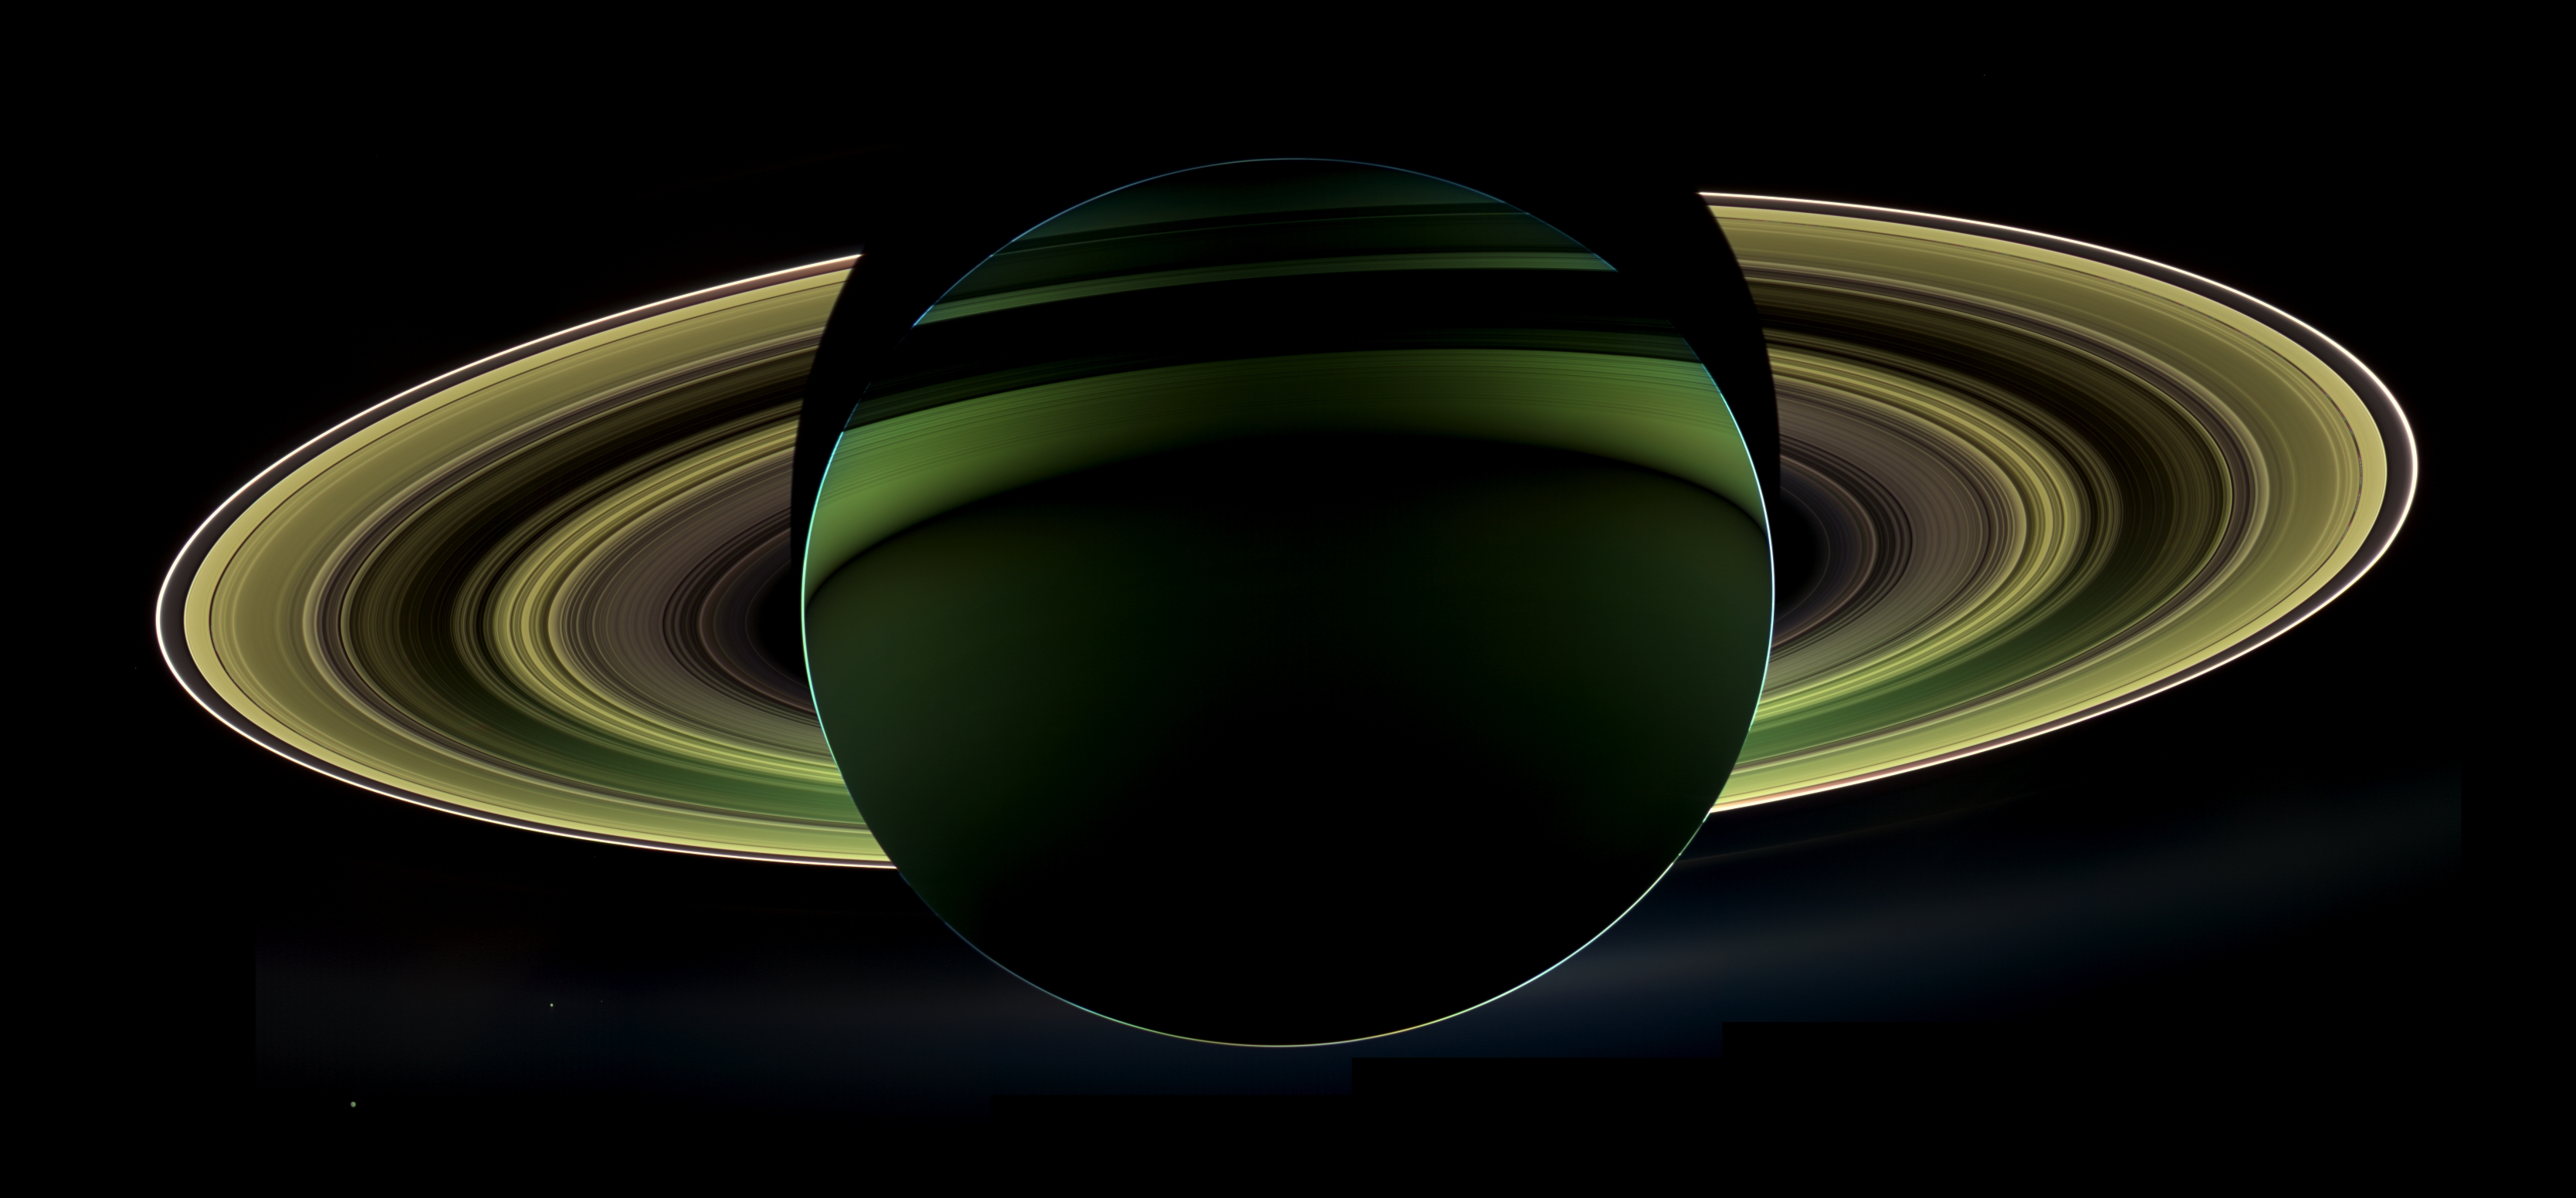 General 3336x1552 astronomy Saturn planetary rings planet Solar System low light simple background digital art space art